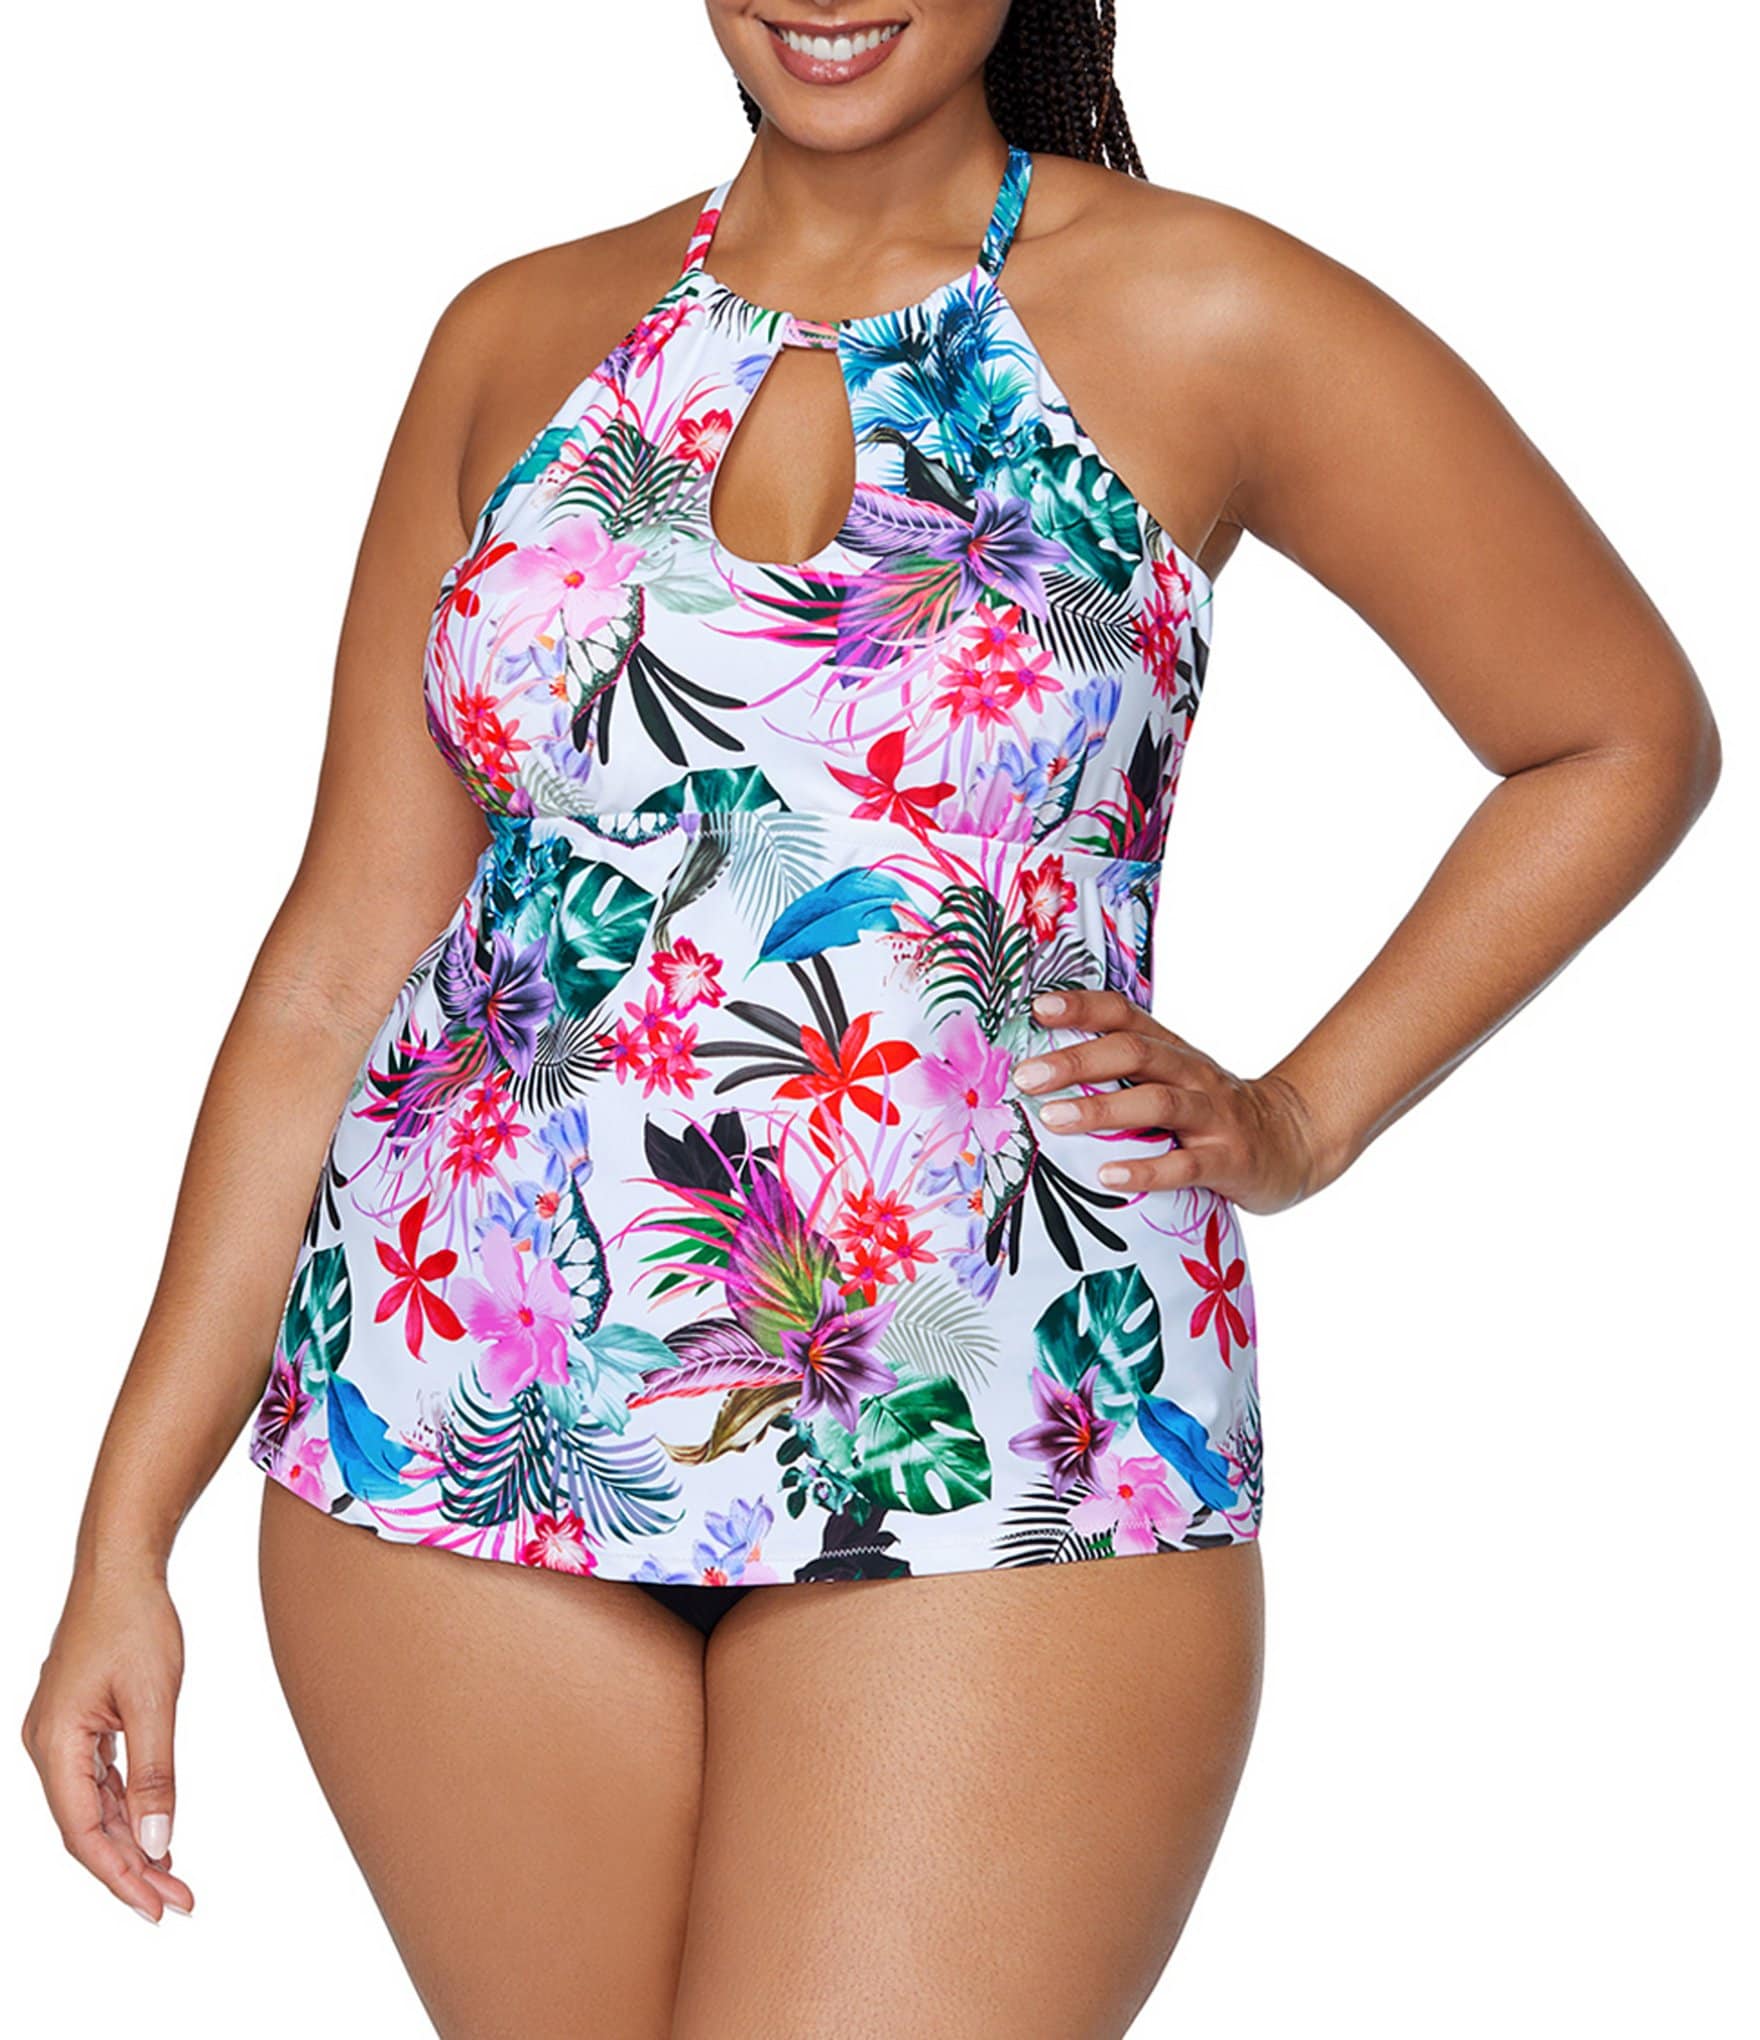 womens swimsuit coverups: Women's Plus-Size Swimsuits & Cover-Ups